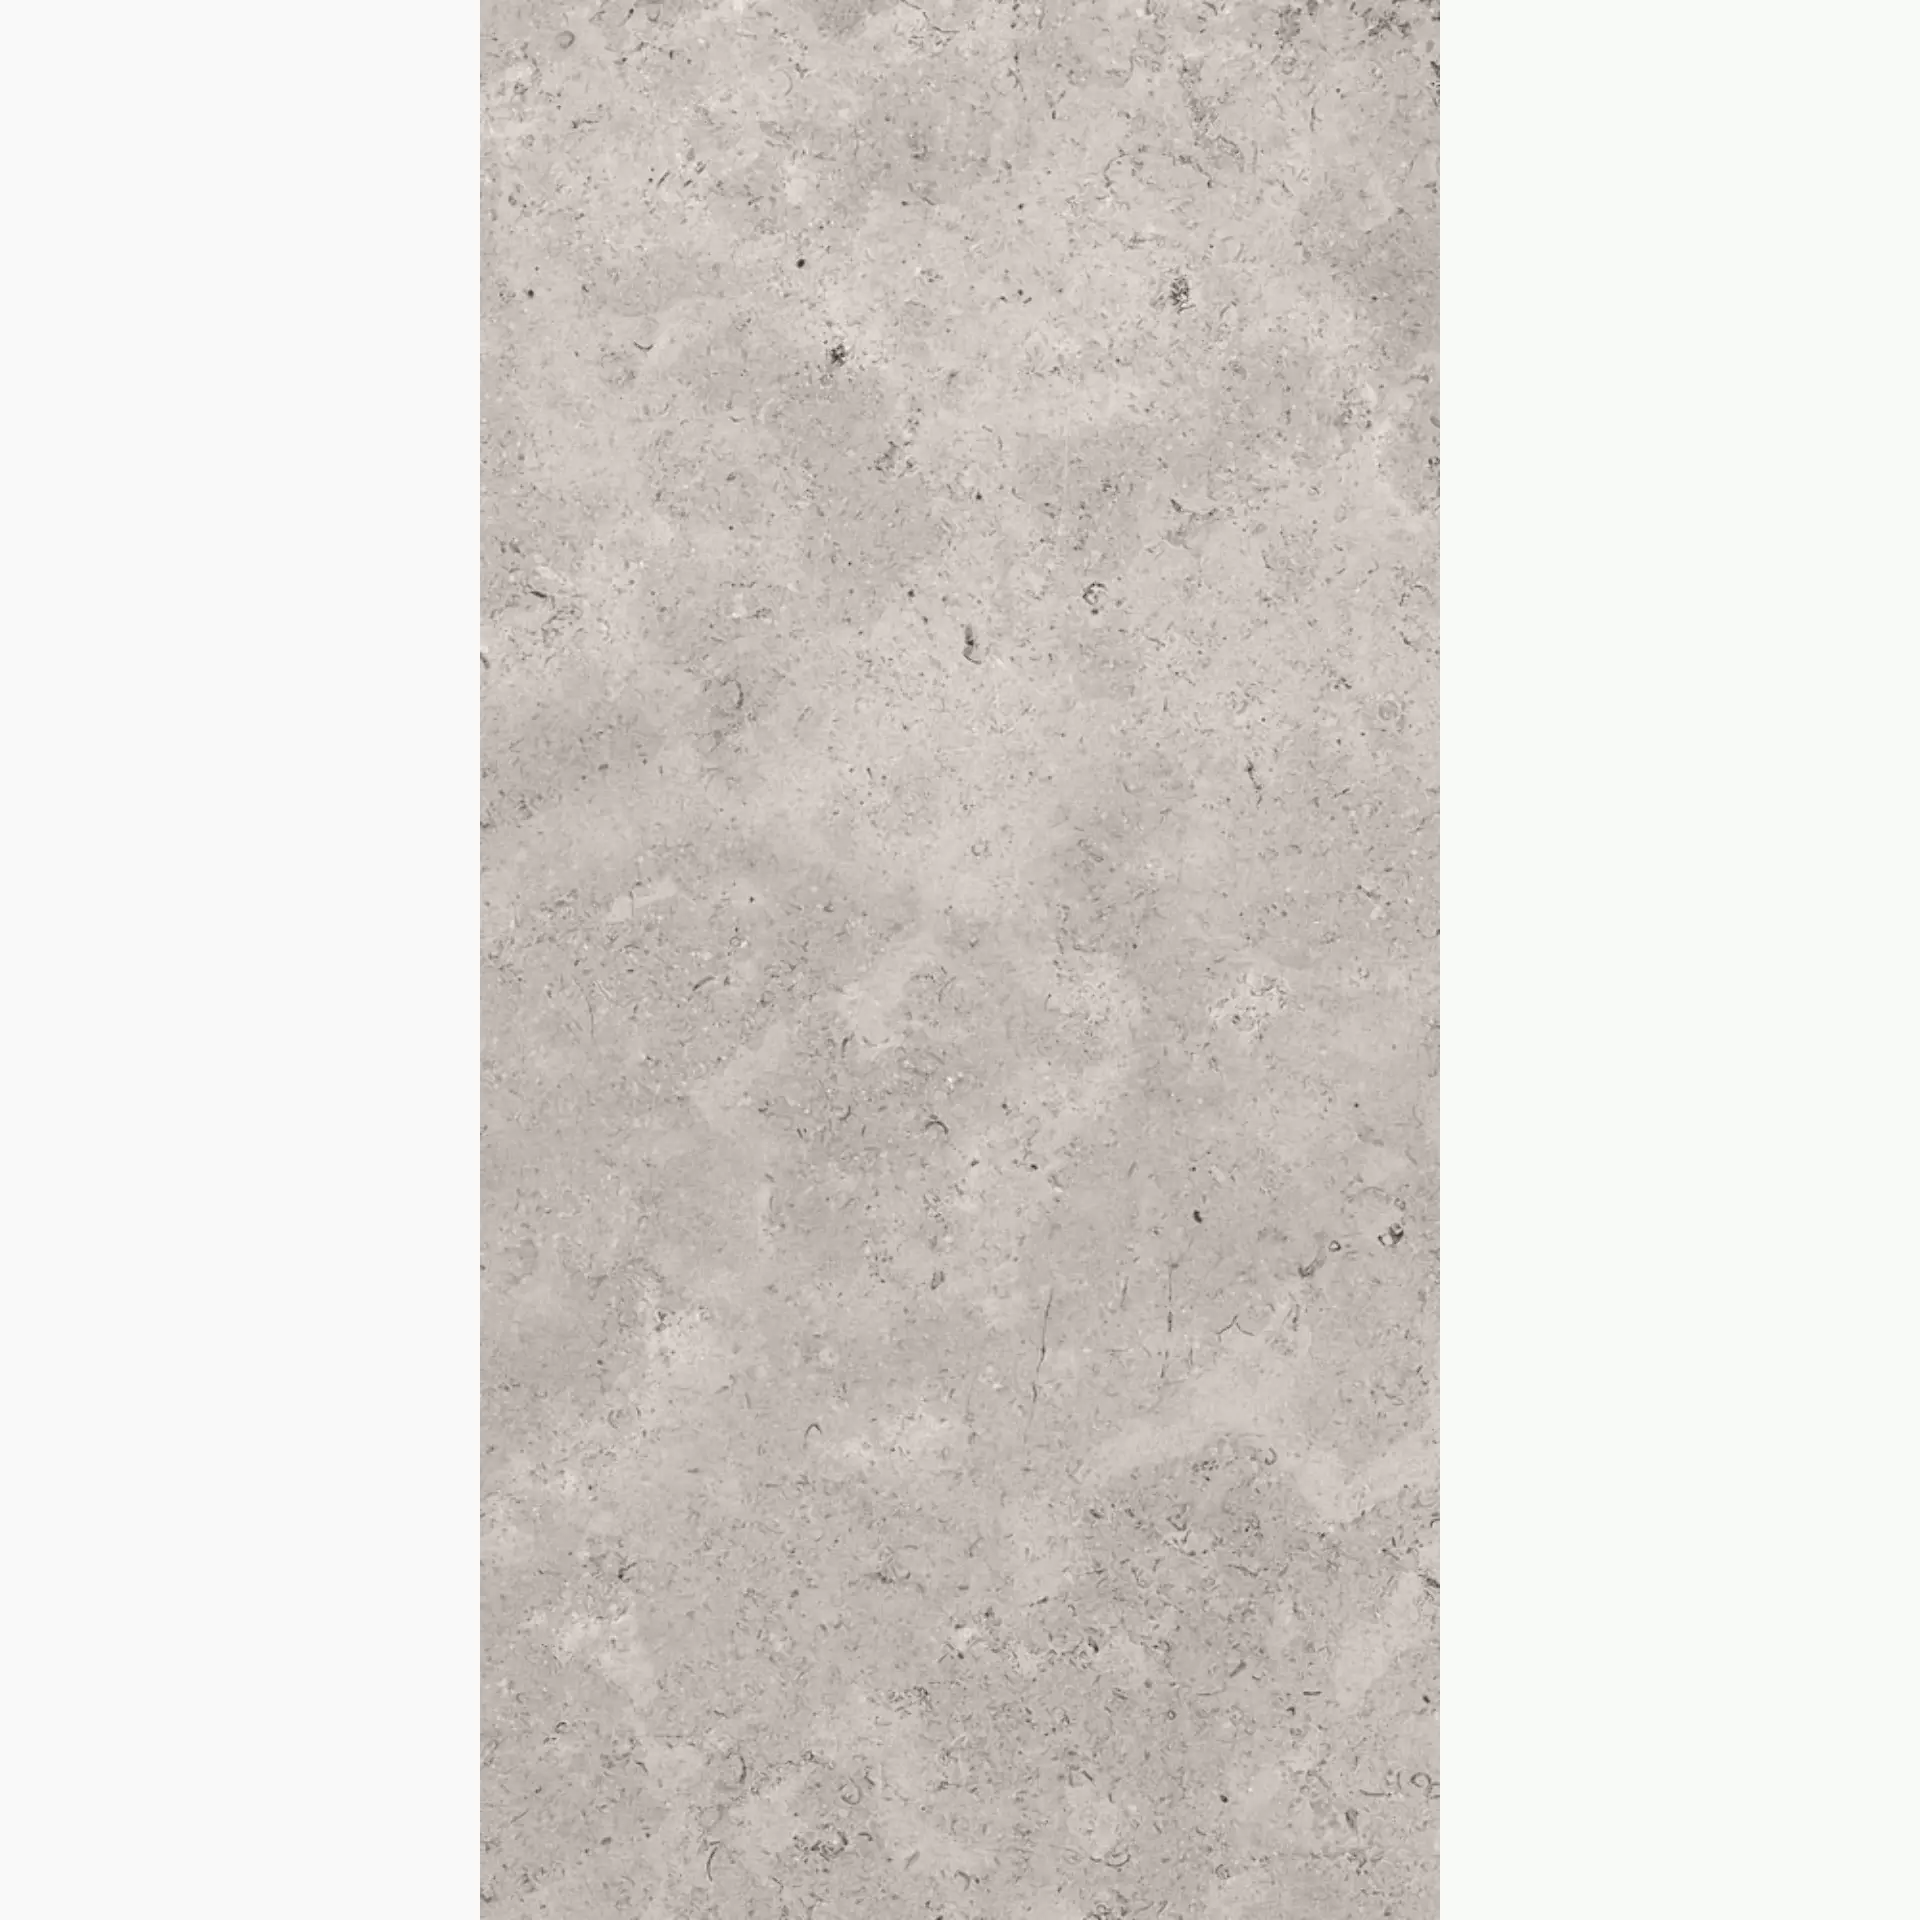 Sant Agostino Unionstone 2 Cedre Grey Natural CSACEDGR30 30x60cm rectified 10mm